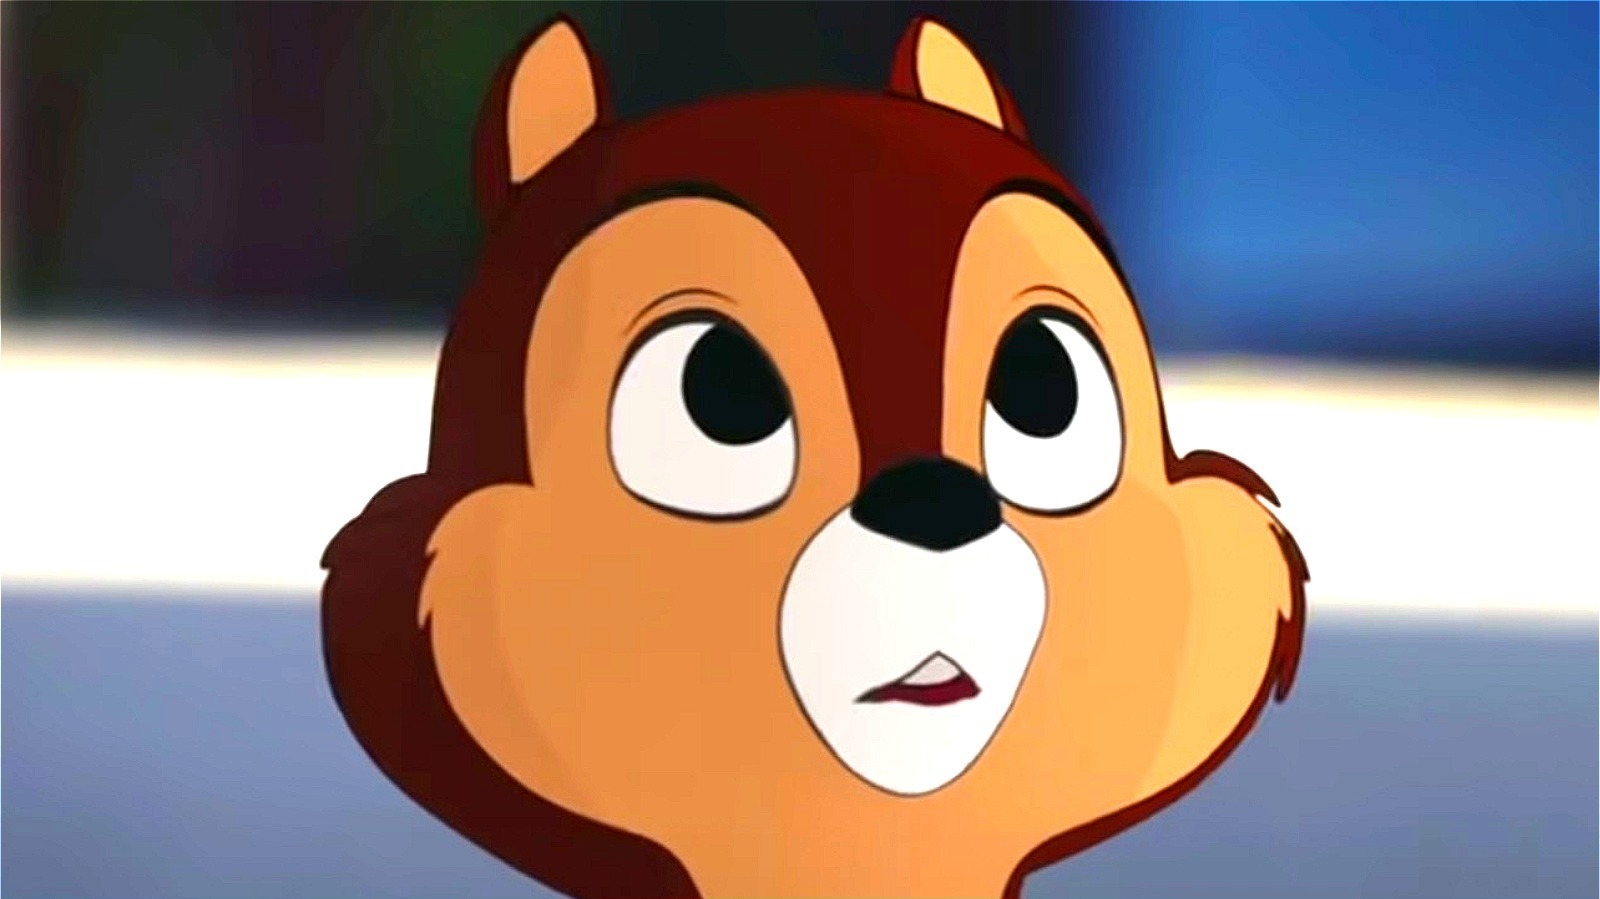 the-song-in-the-chip-n-dale-rescue-rangers-teaser-trailer-what-is-it-24ssports